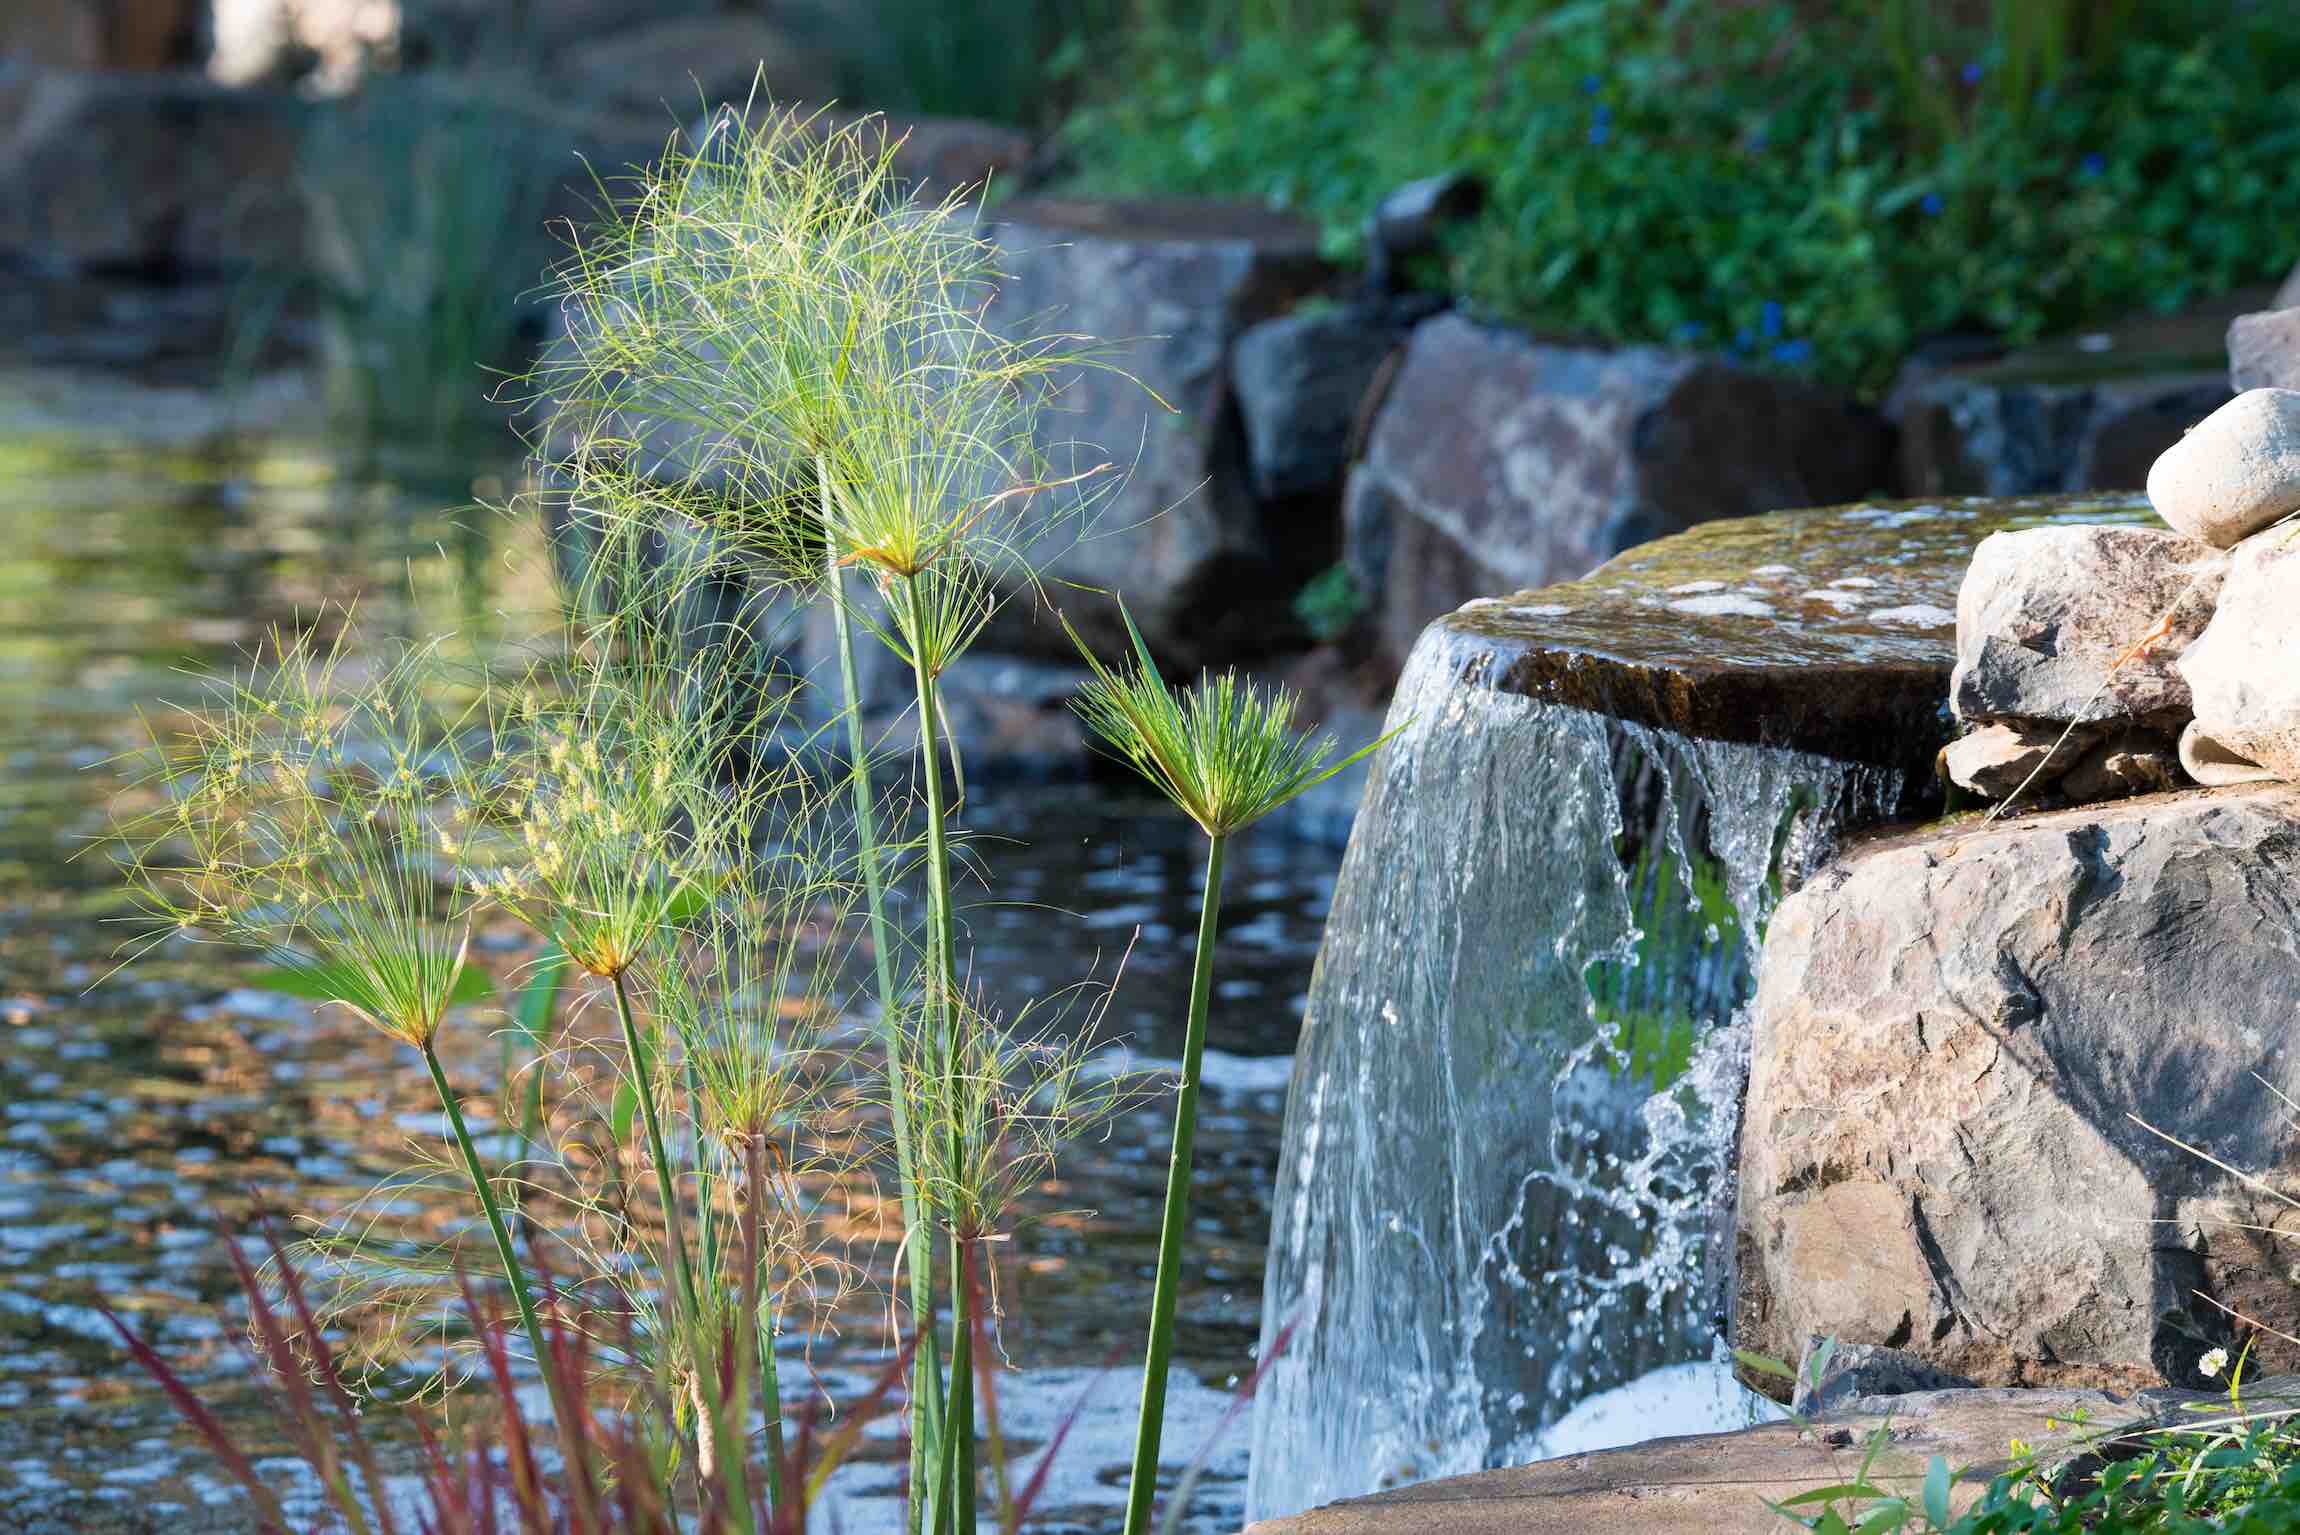 A view of awaterfall in the duck pondat Country Willows Inn and Estate in Ashland, Oregon creates a peaceful spot to relax along a walking trail.